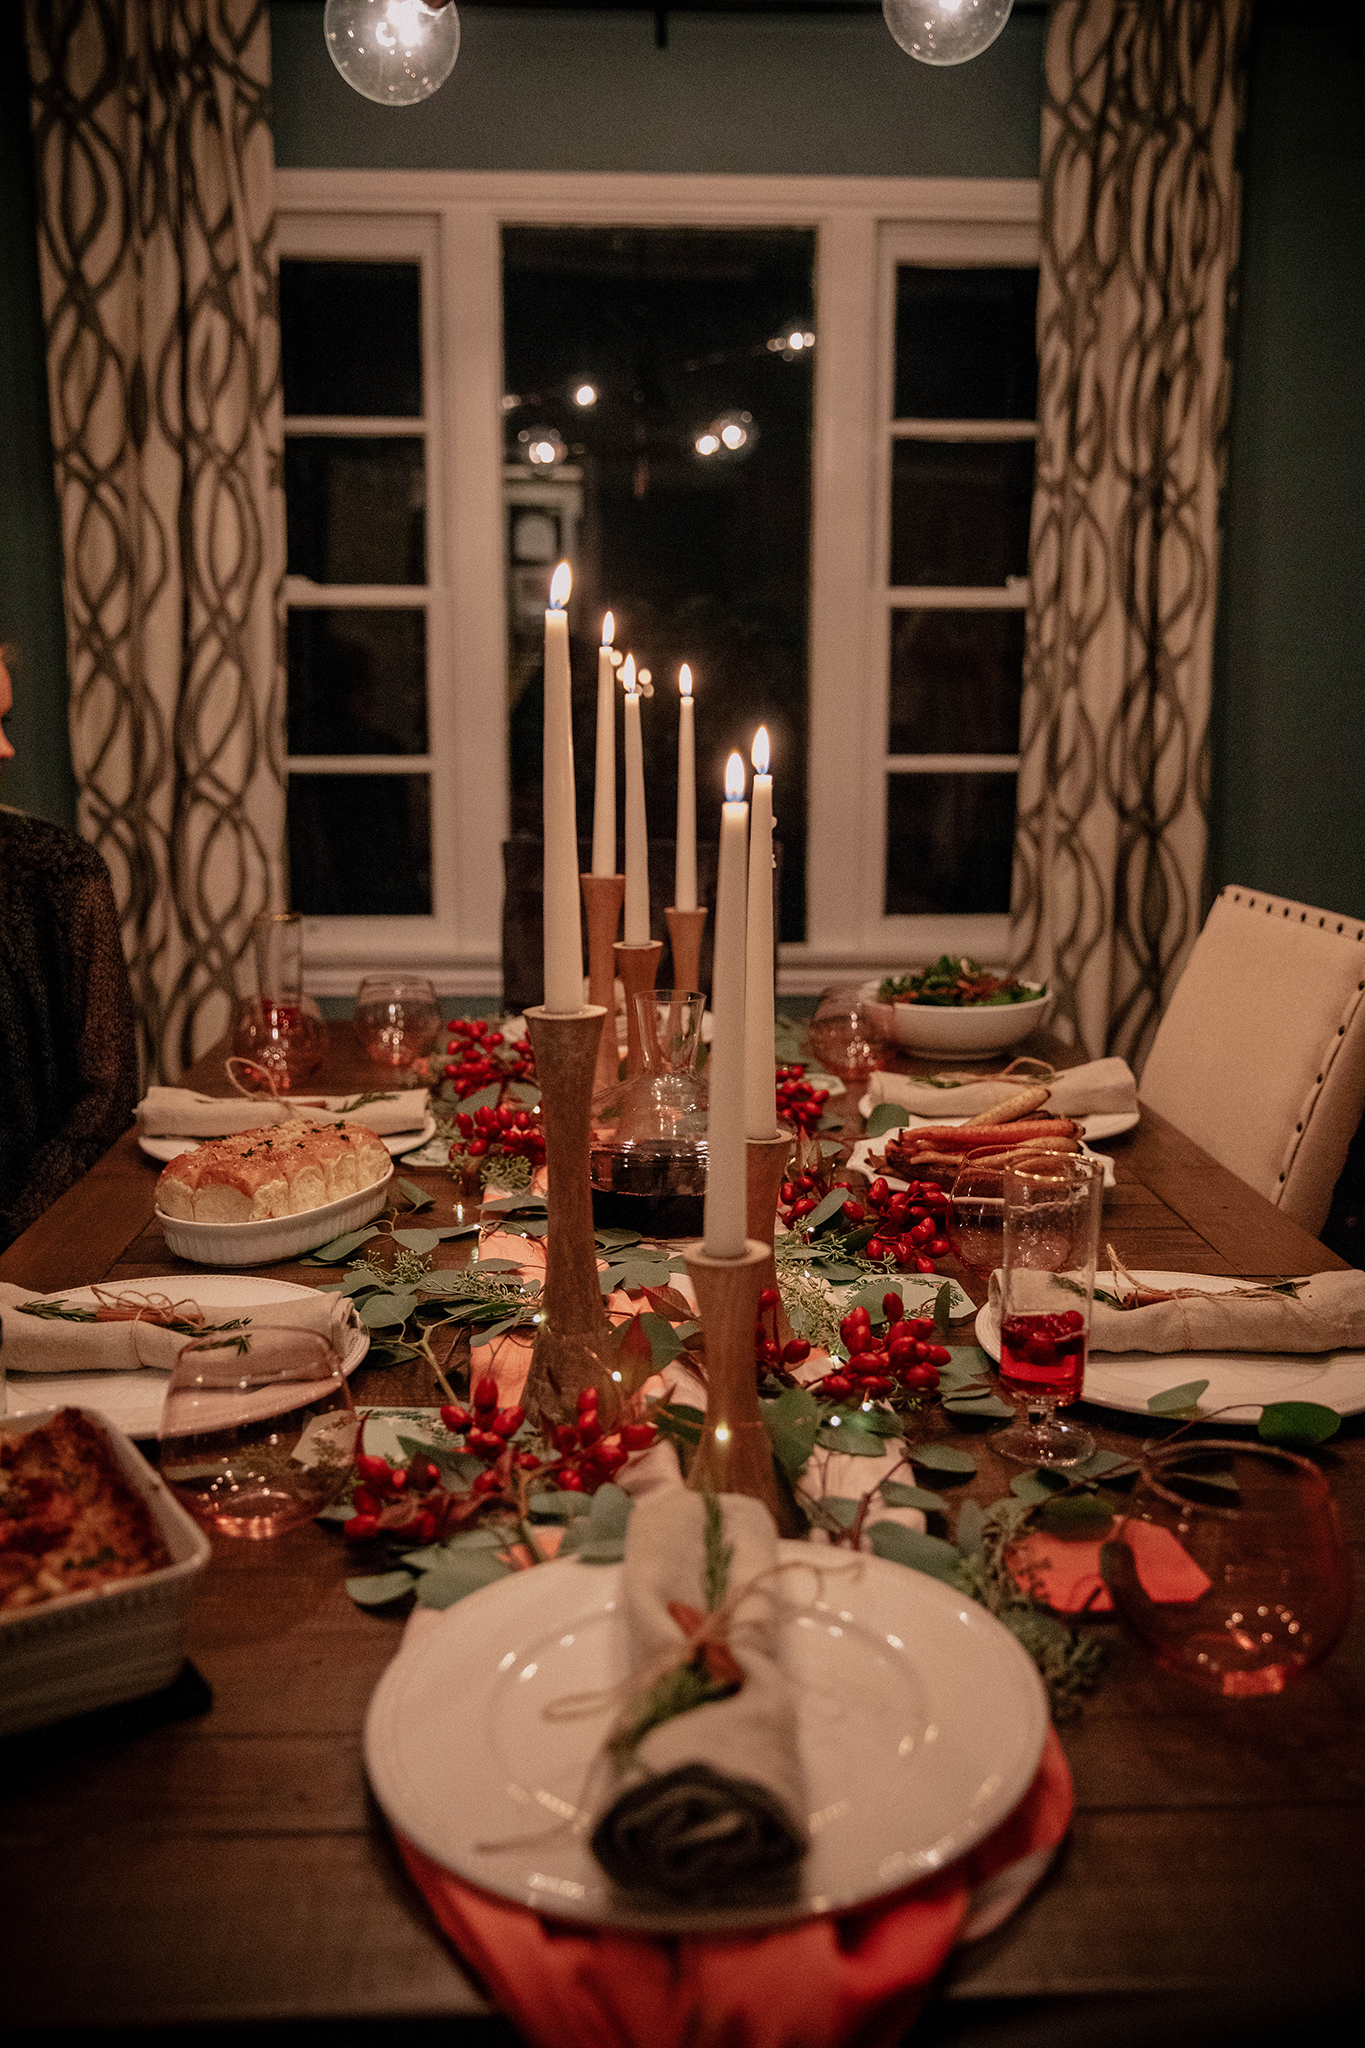 TIPS FOR HOSTING FOR THE HOLIDAYS